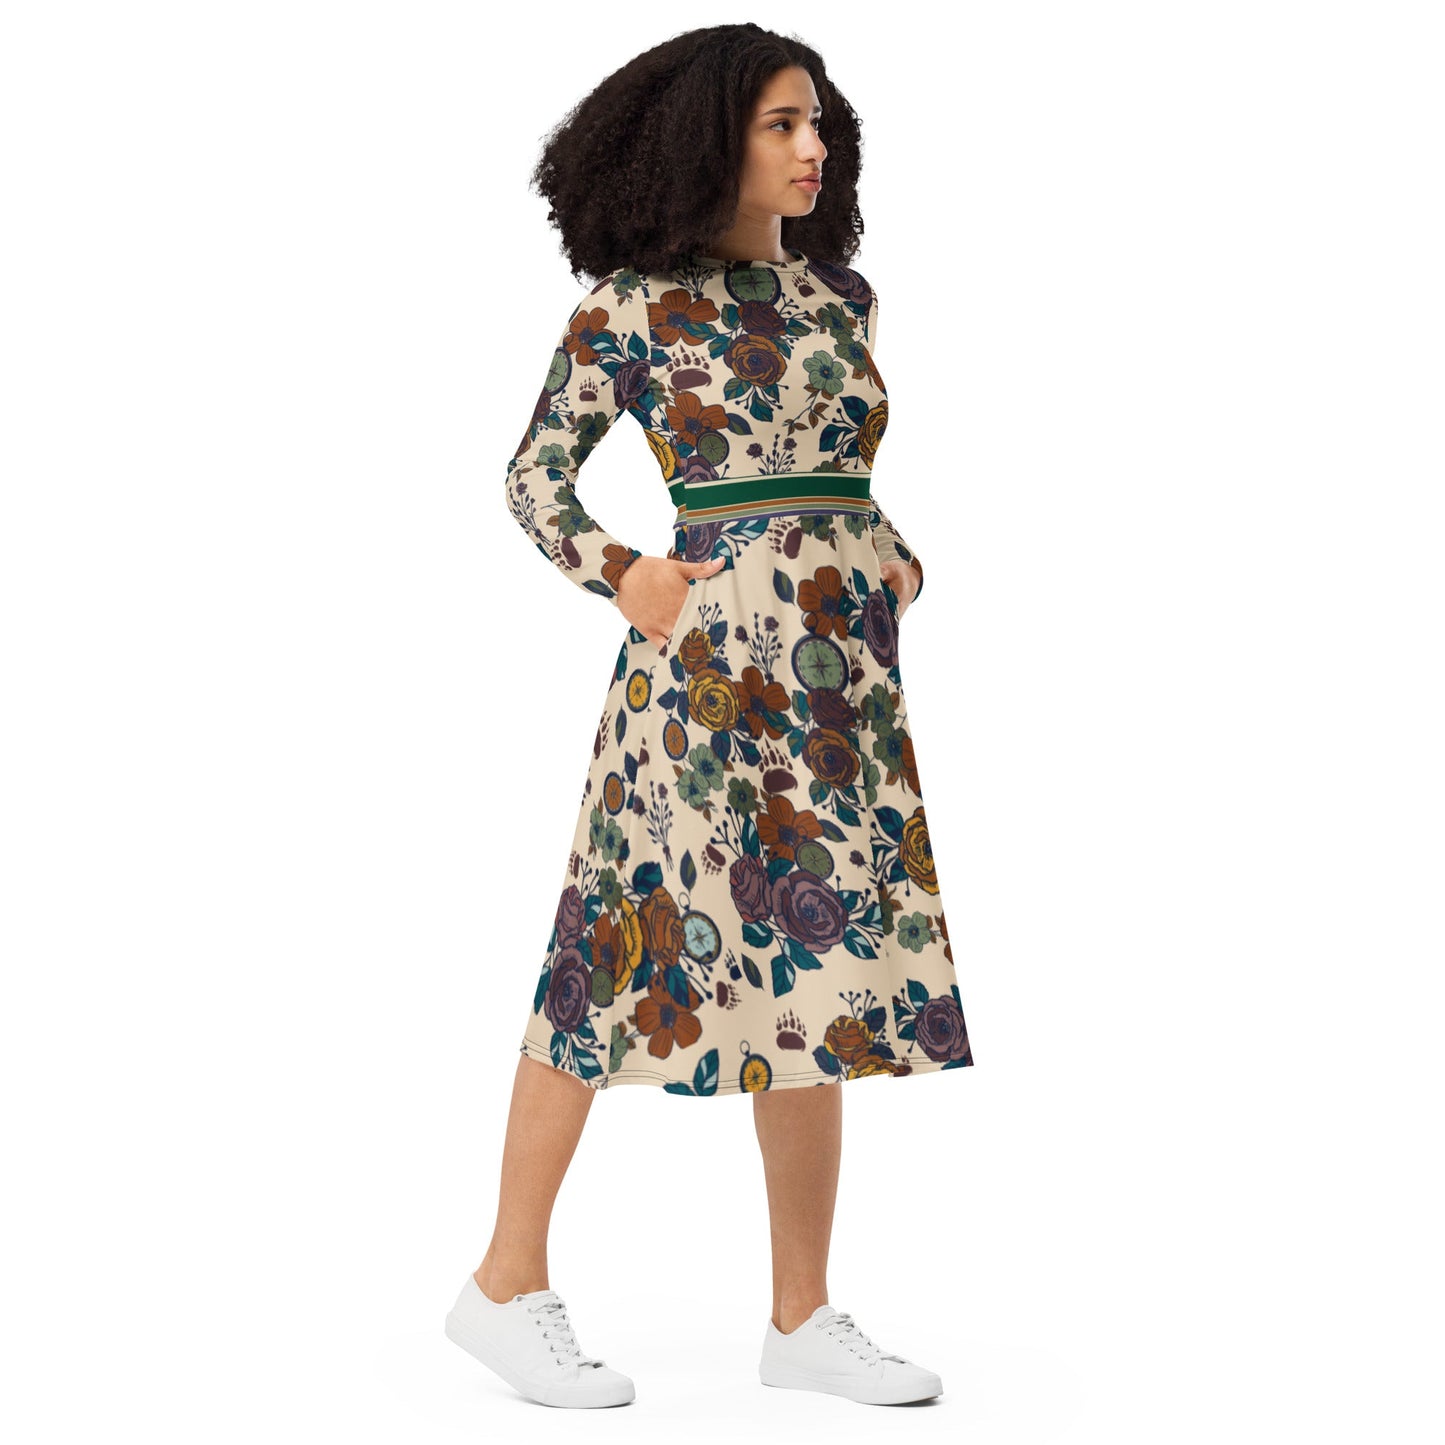 Retro Compass Floral Long Sleeve Adventure Dress with Pockets - Appalachian Bittersweet -